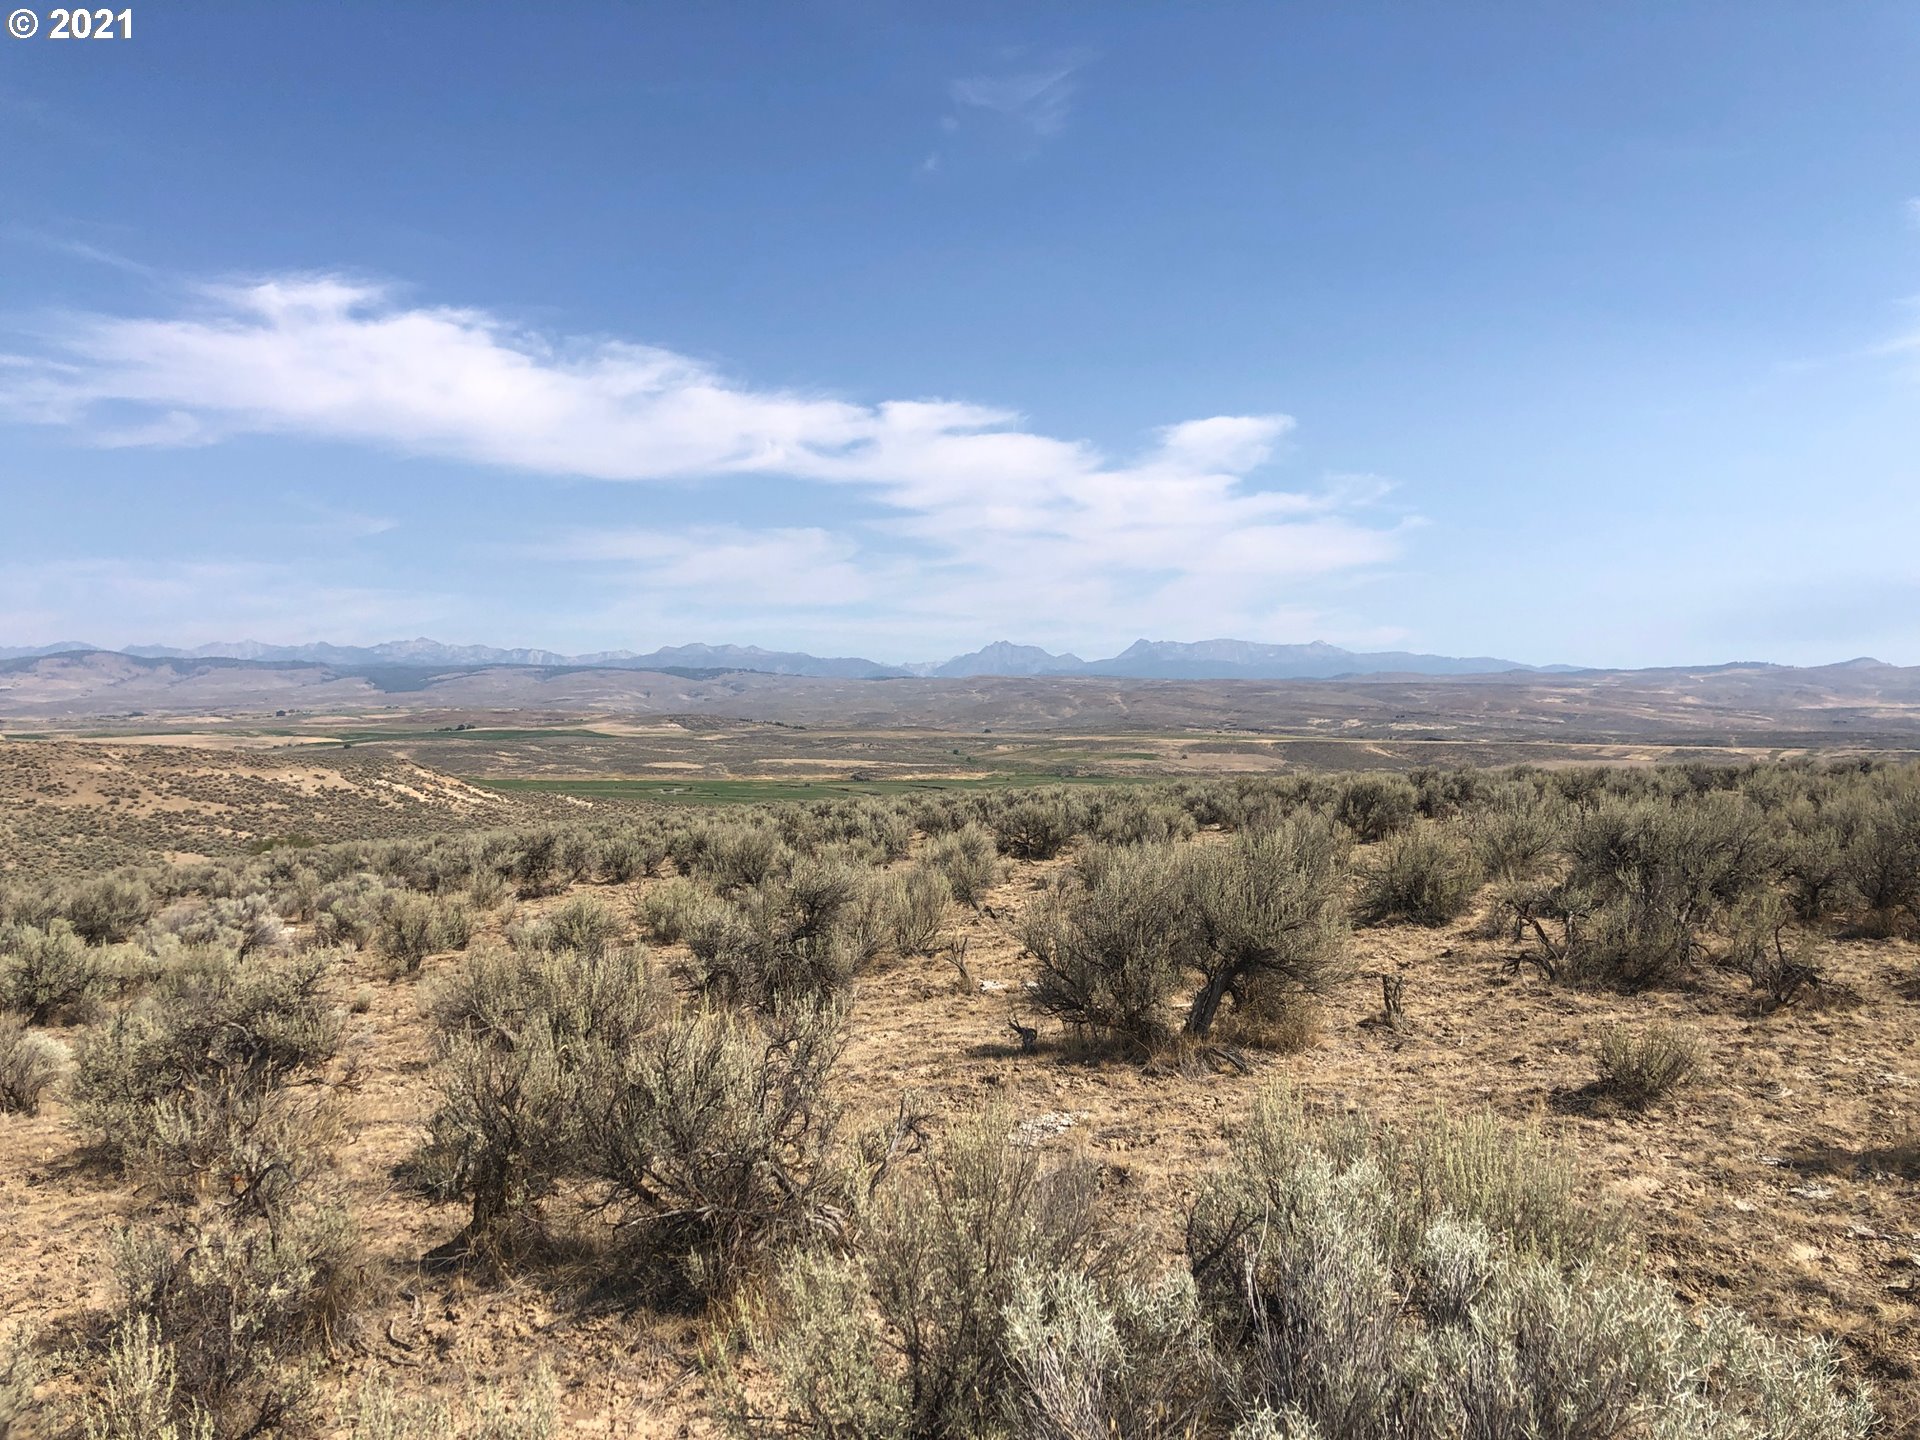 Beautiful piece of property with absolute stunning views of the Keating valley. Property qualifies for Single family dwelling per lot of record. Relaxing drive to town or back to home within 20 miles to Baker City. Power on property.